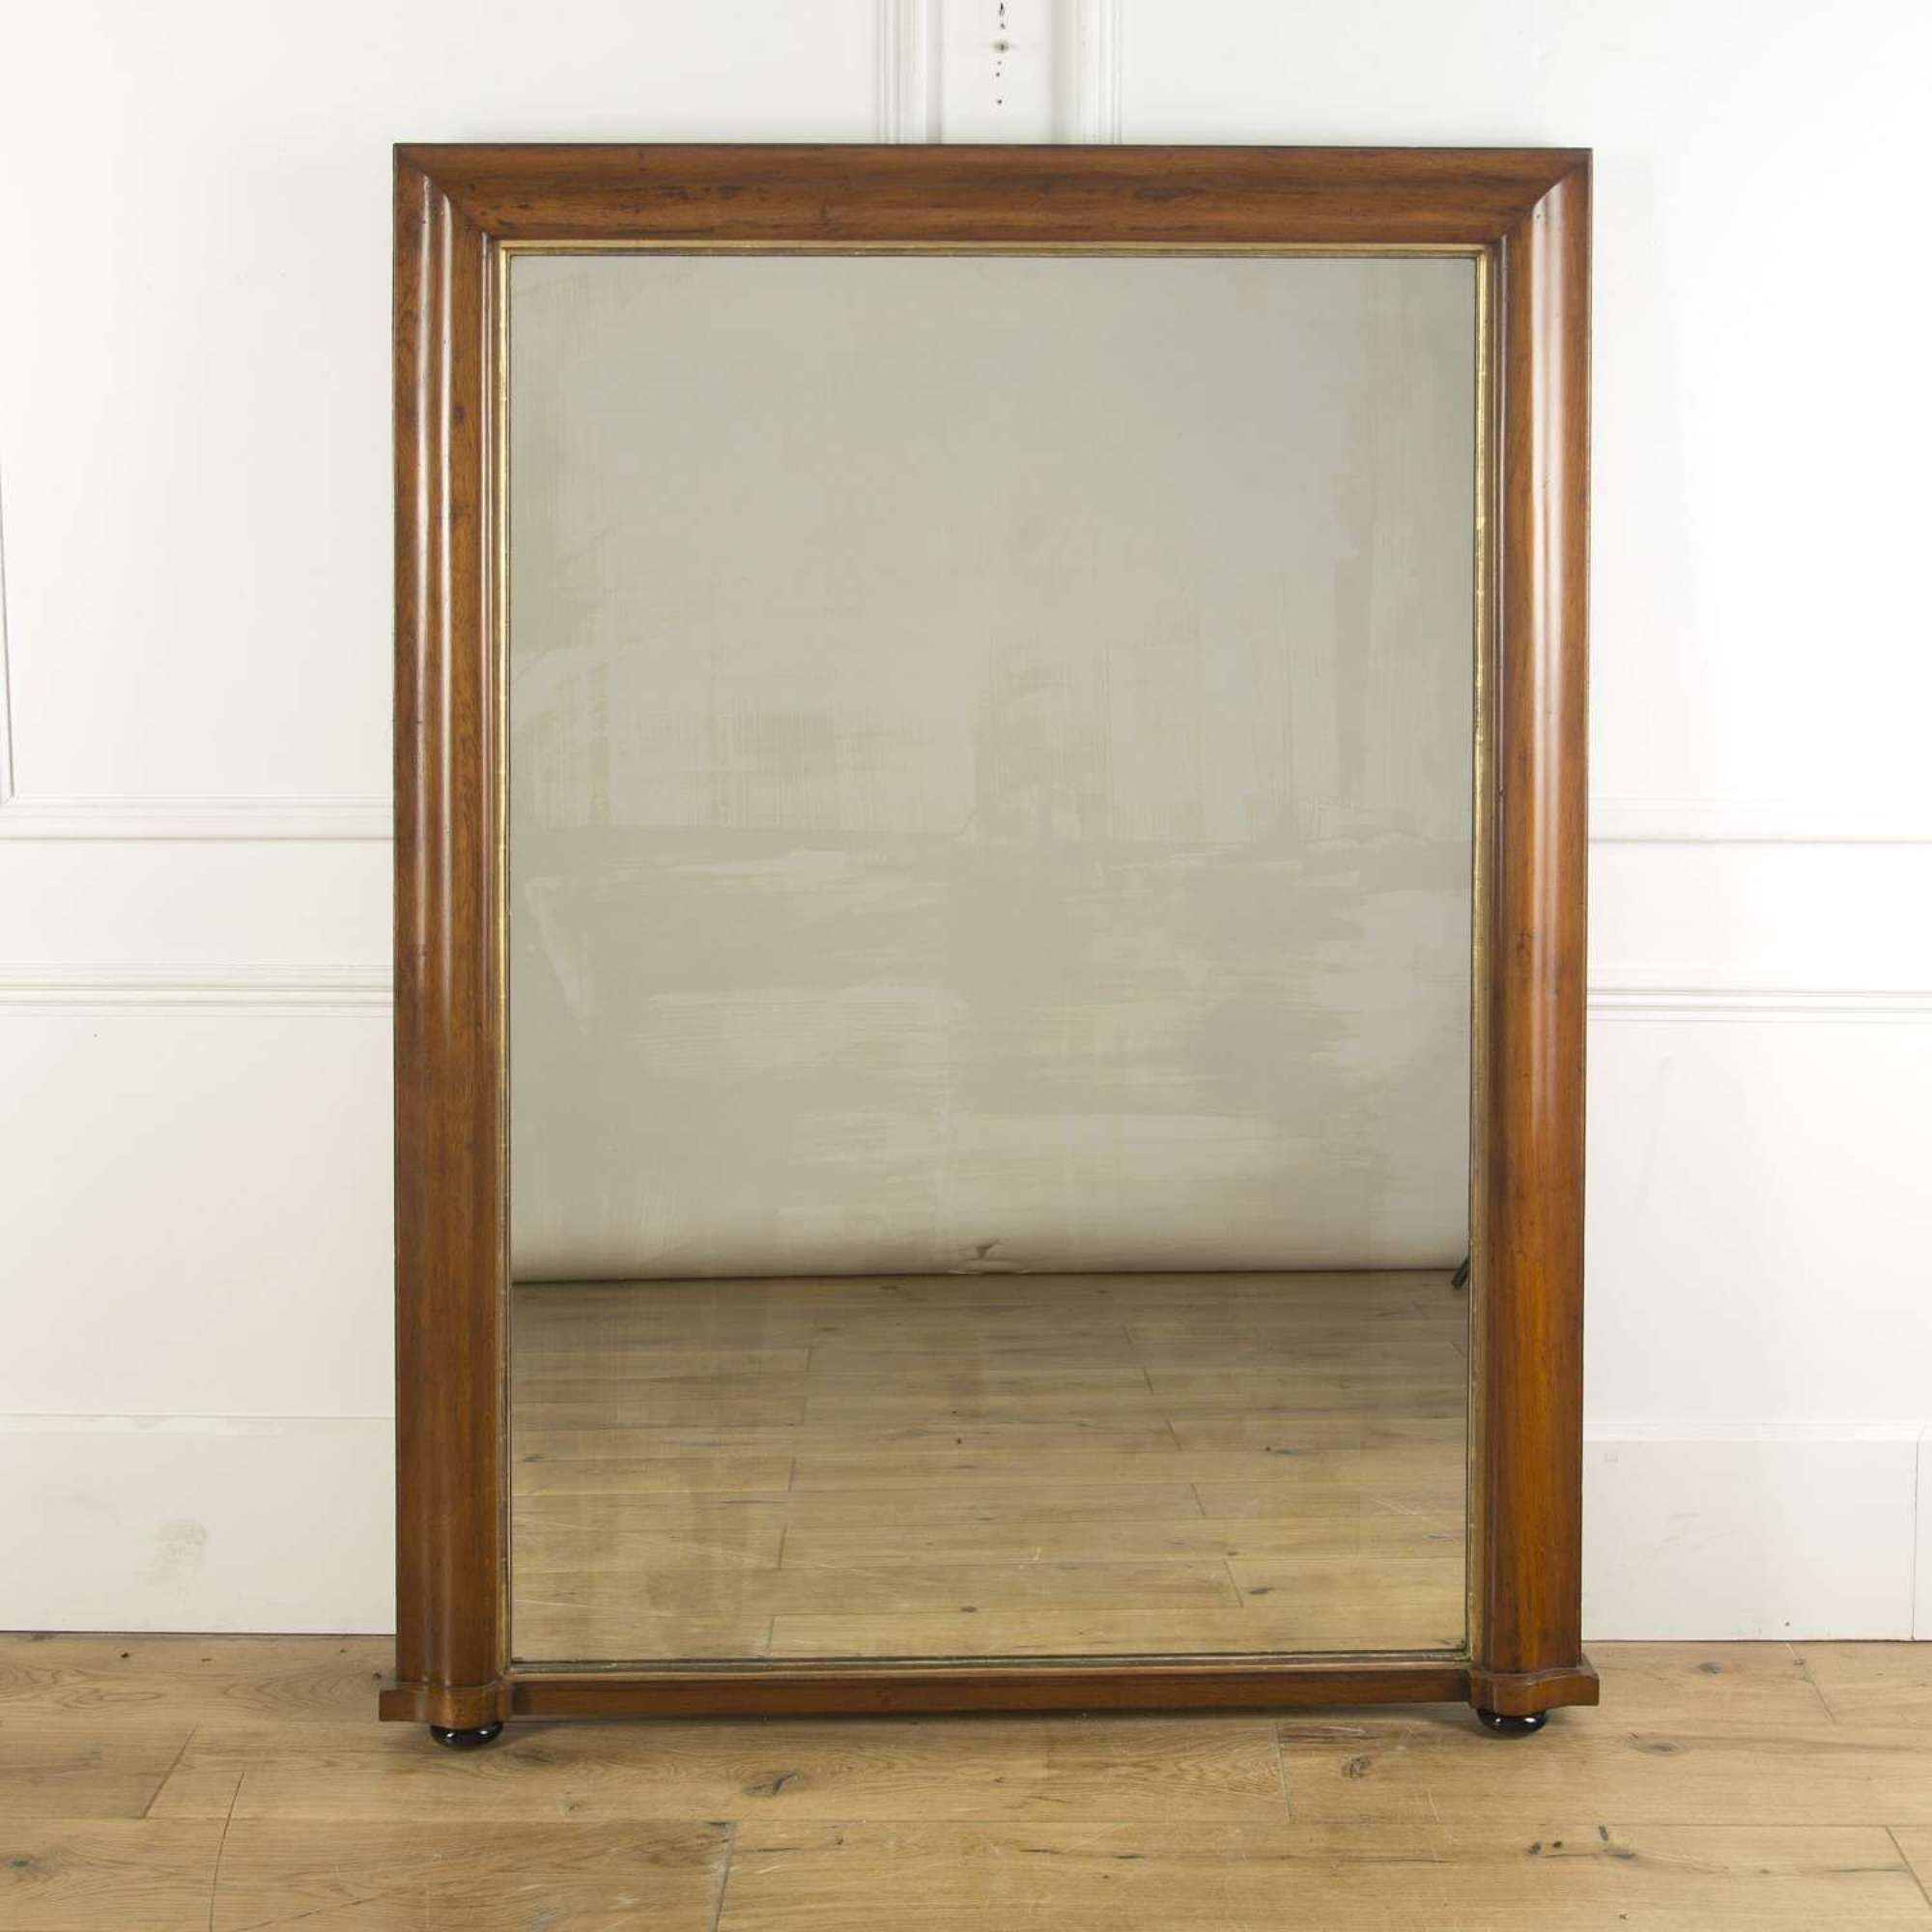 A large over mantle mirror